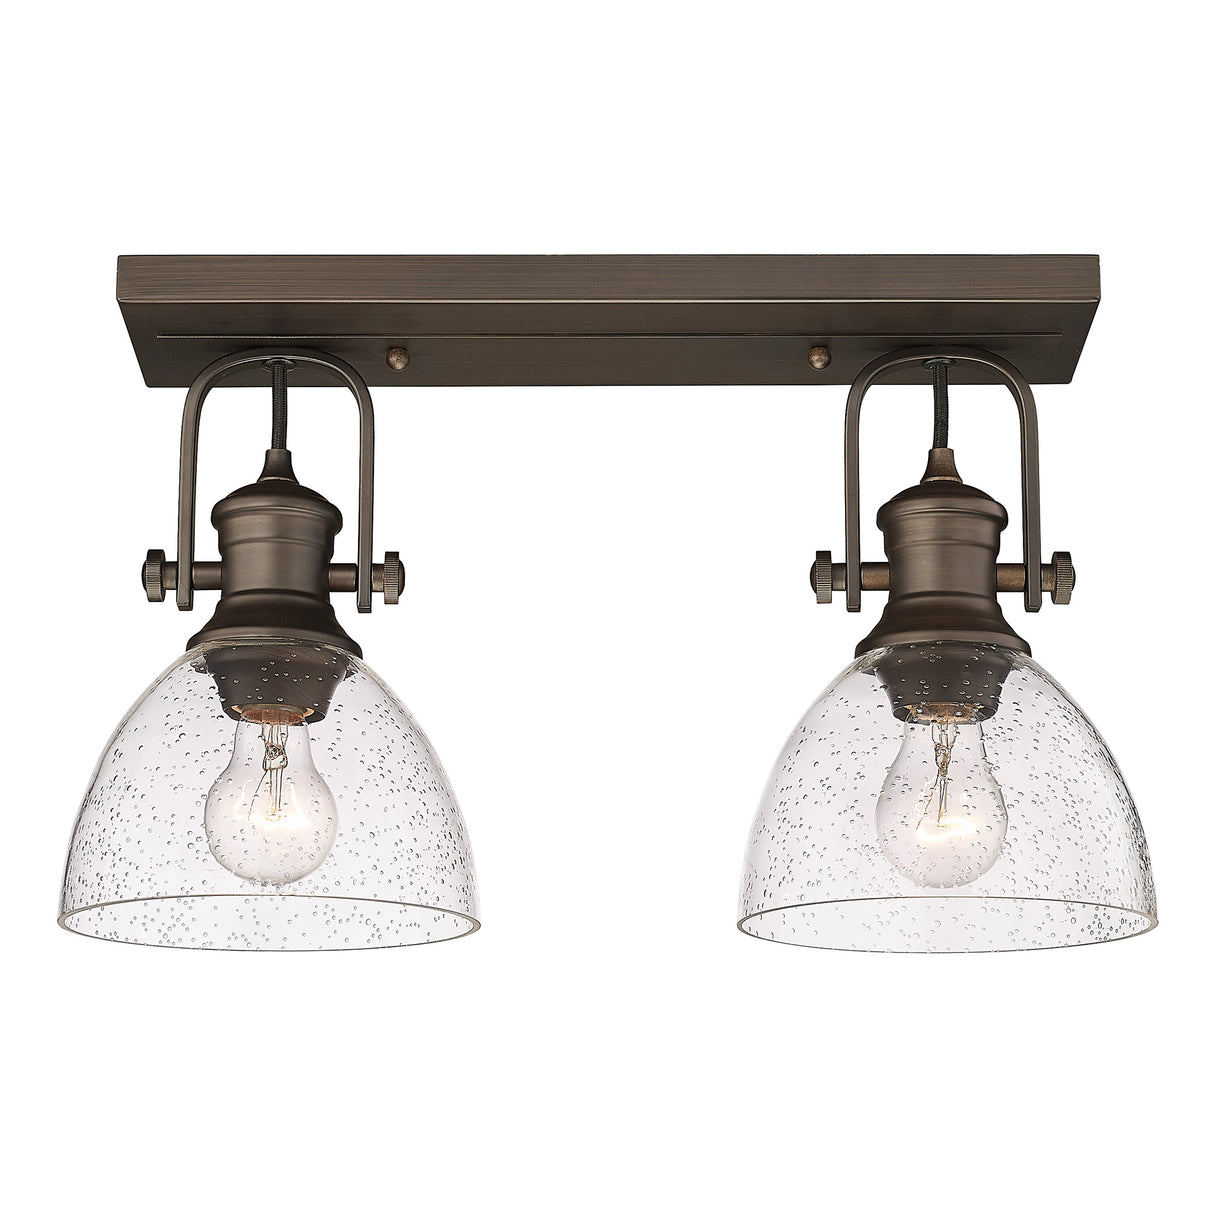 Hines 2-Light Semi-Flush in Rubbed Bronze with Seeded Glass